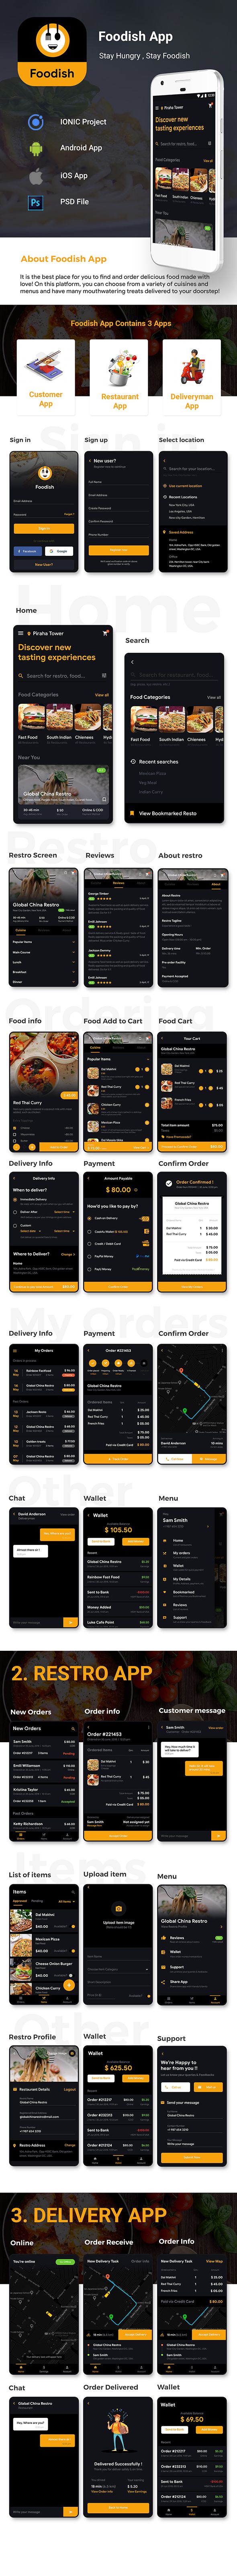 Food Ordering App with Delivery App| Android App + iOS App Template | Foodish (HTML+CSS IONIC 5) - 3